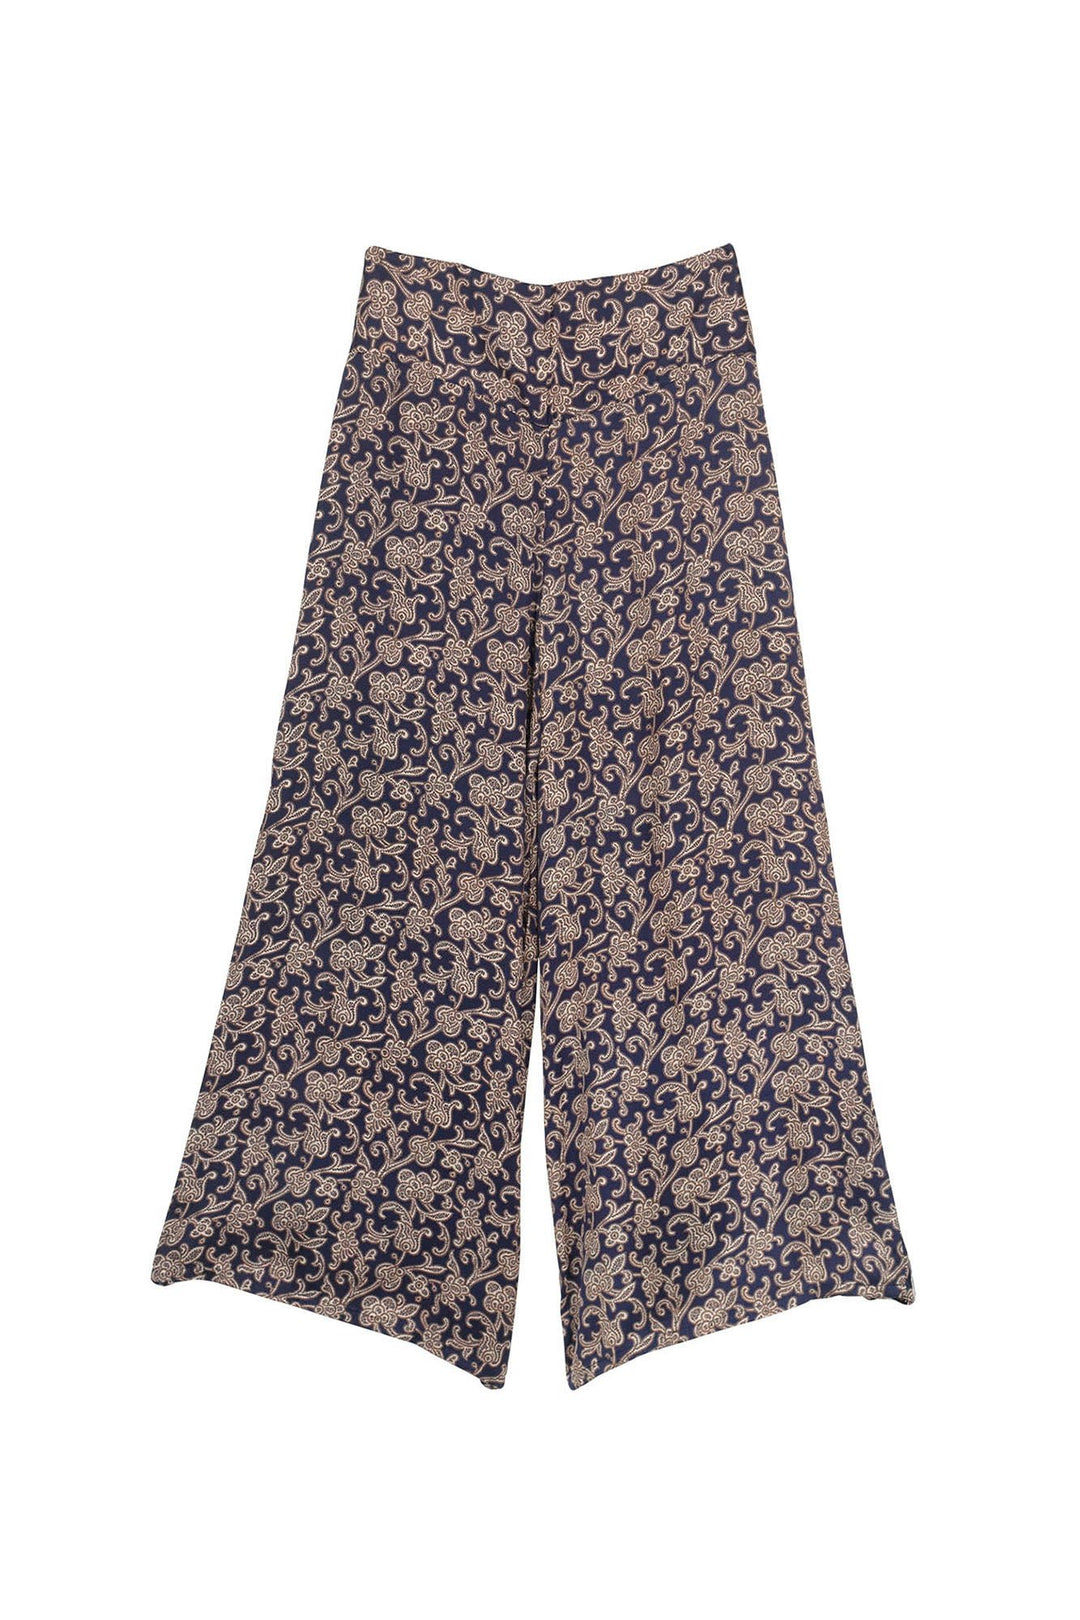 Floral Paisley Blue Palazzo Pant - One Hundred Stars